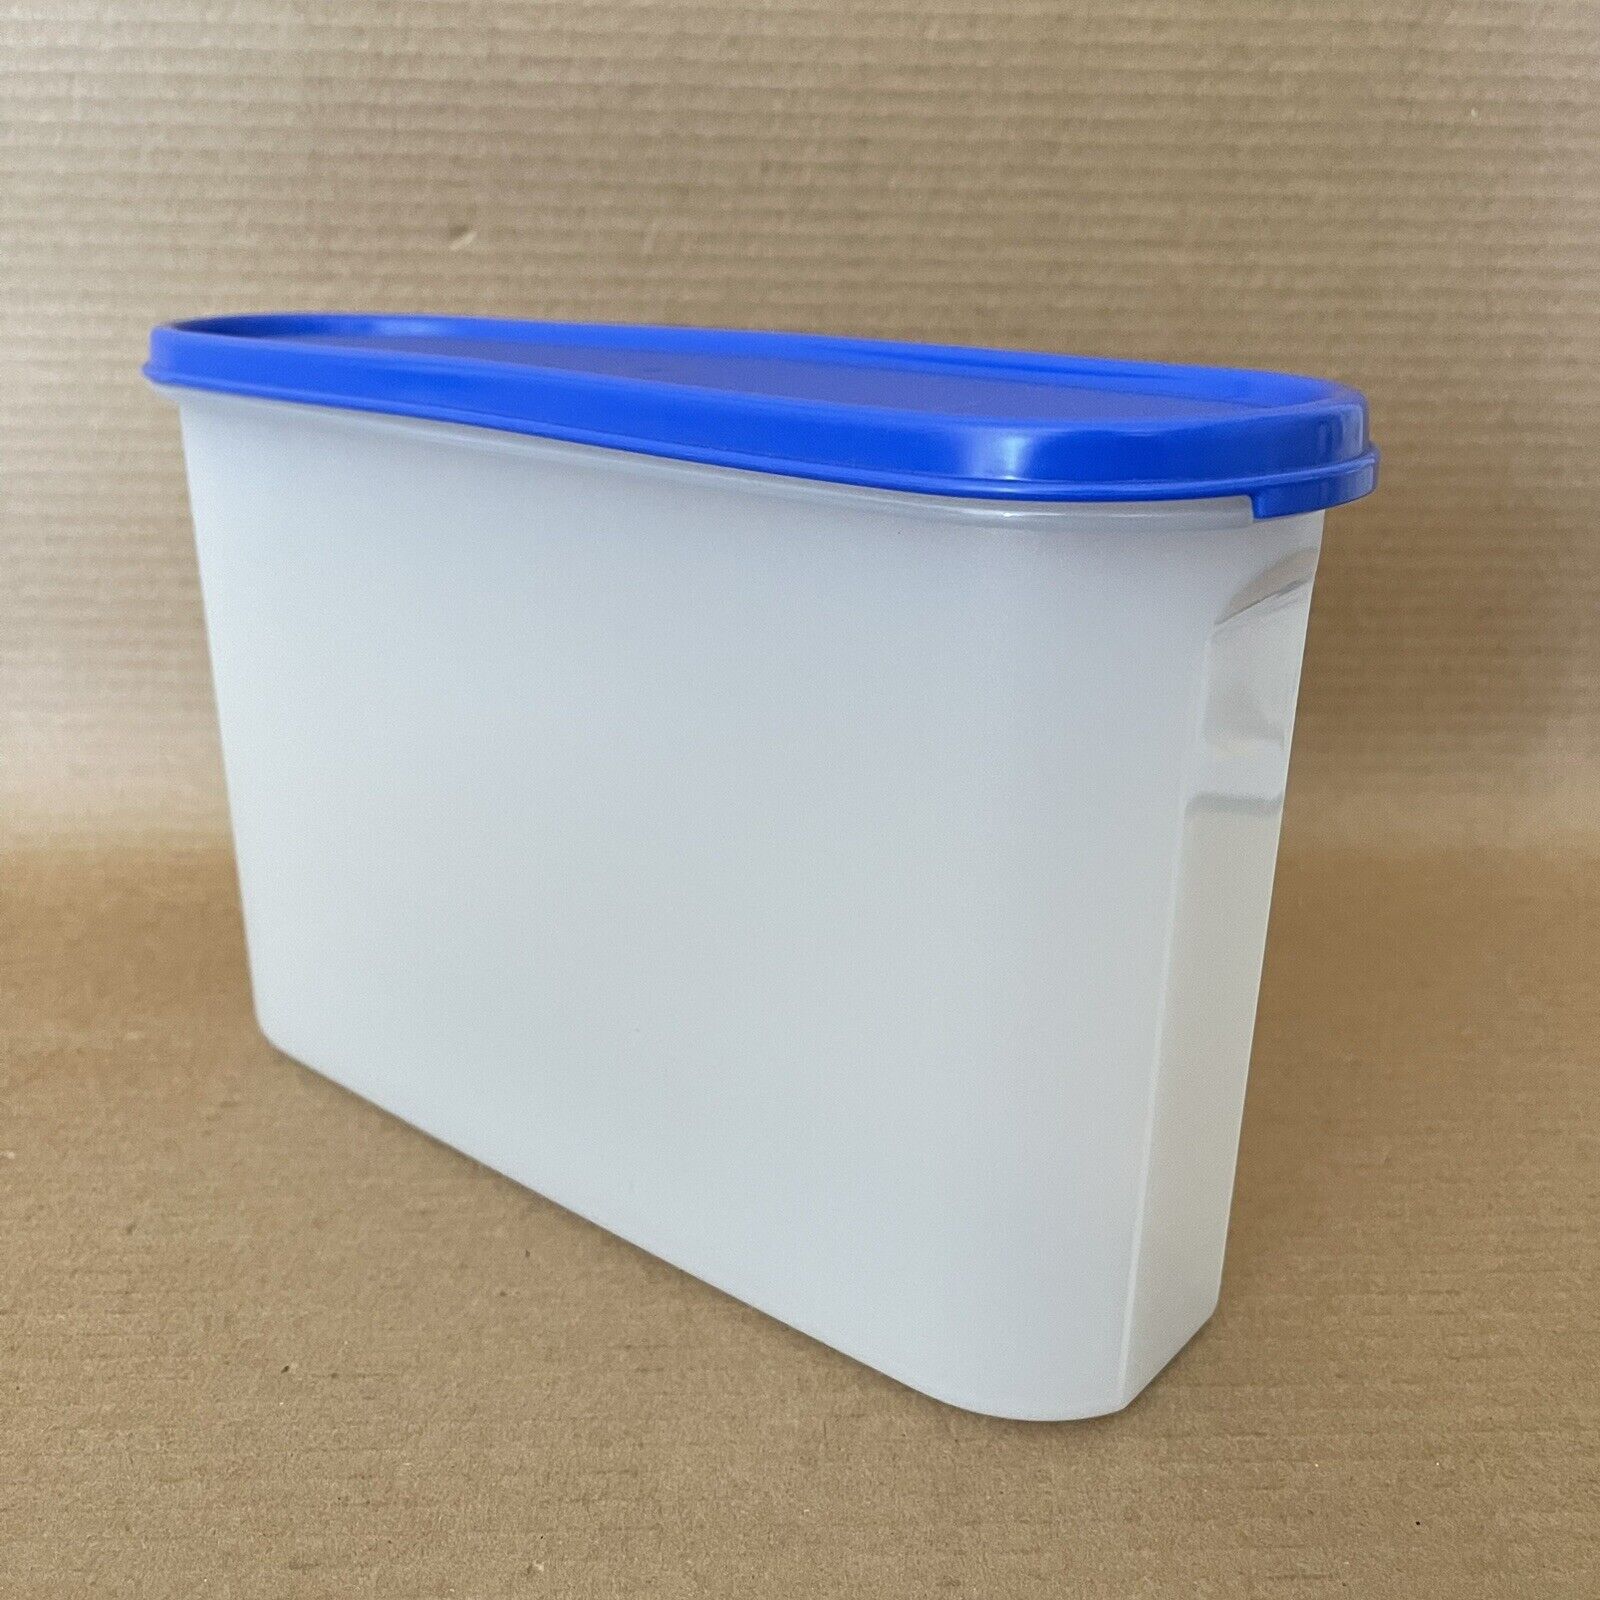 Tupperware Modular Mates Super Oval #3 Container 12 Cup #2401 Blue Seal